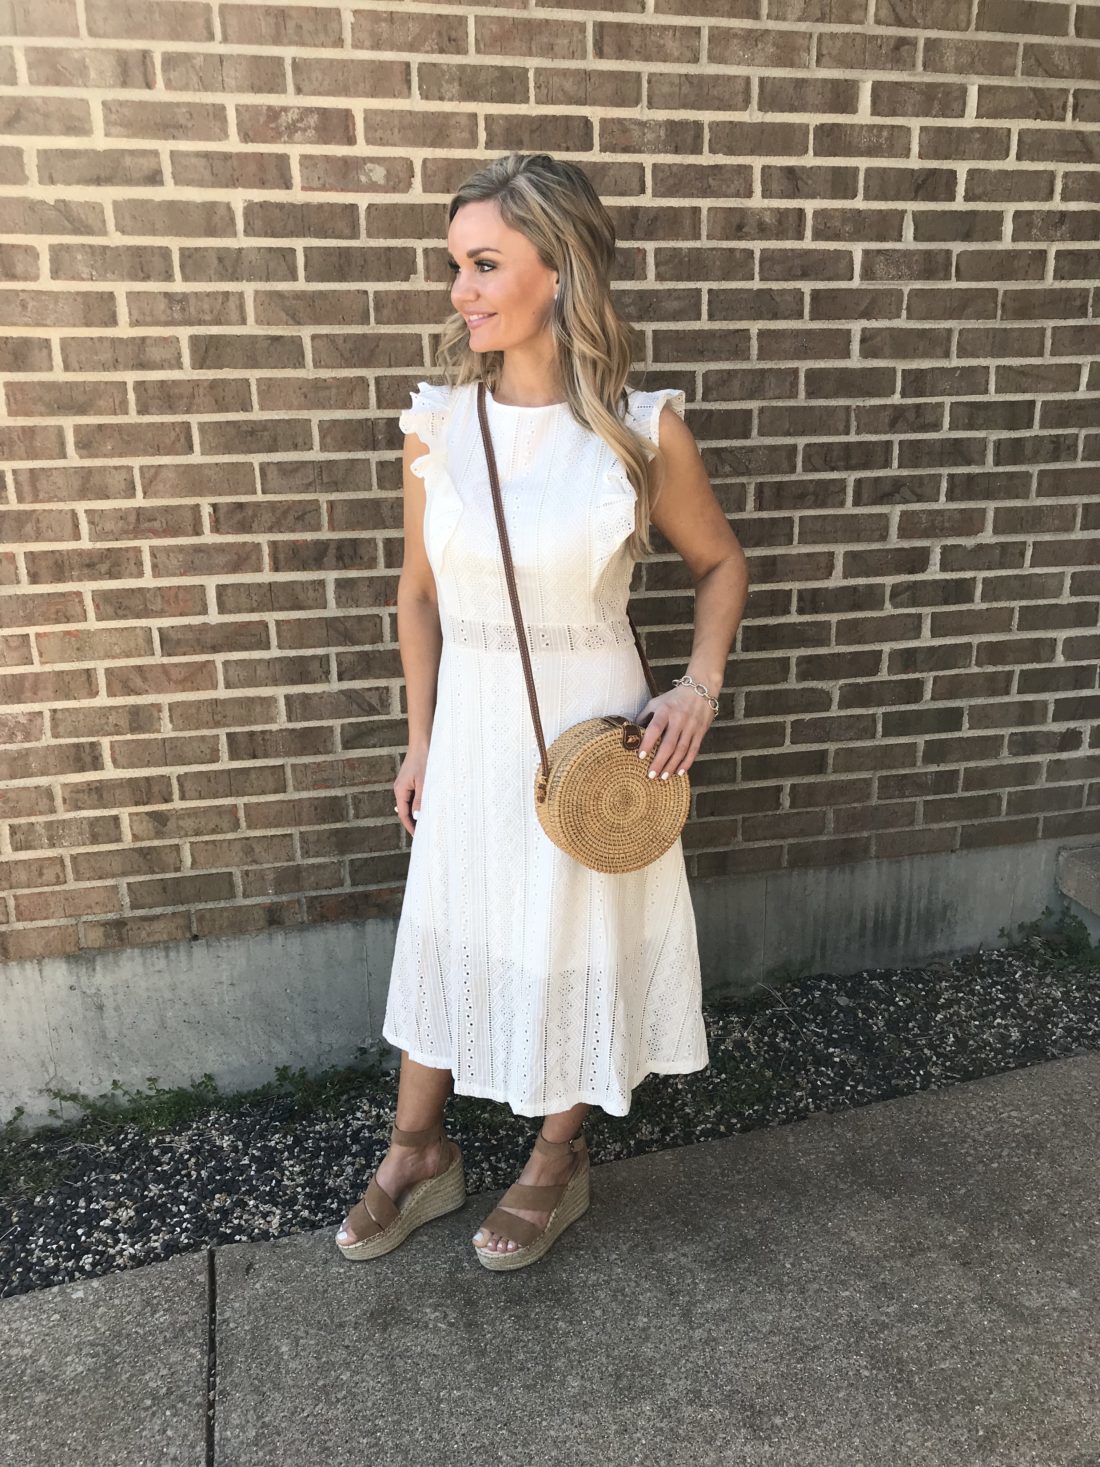 White Eyelet Dress Summer Outfit Ideas